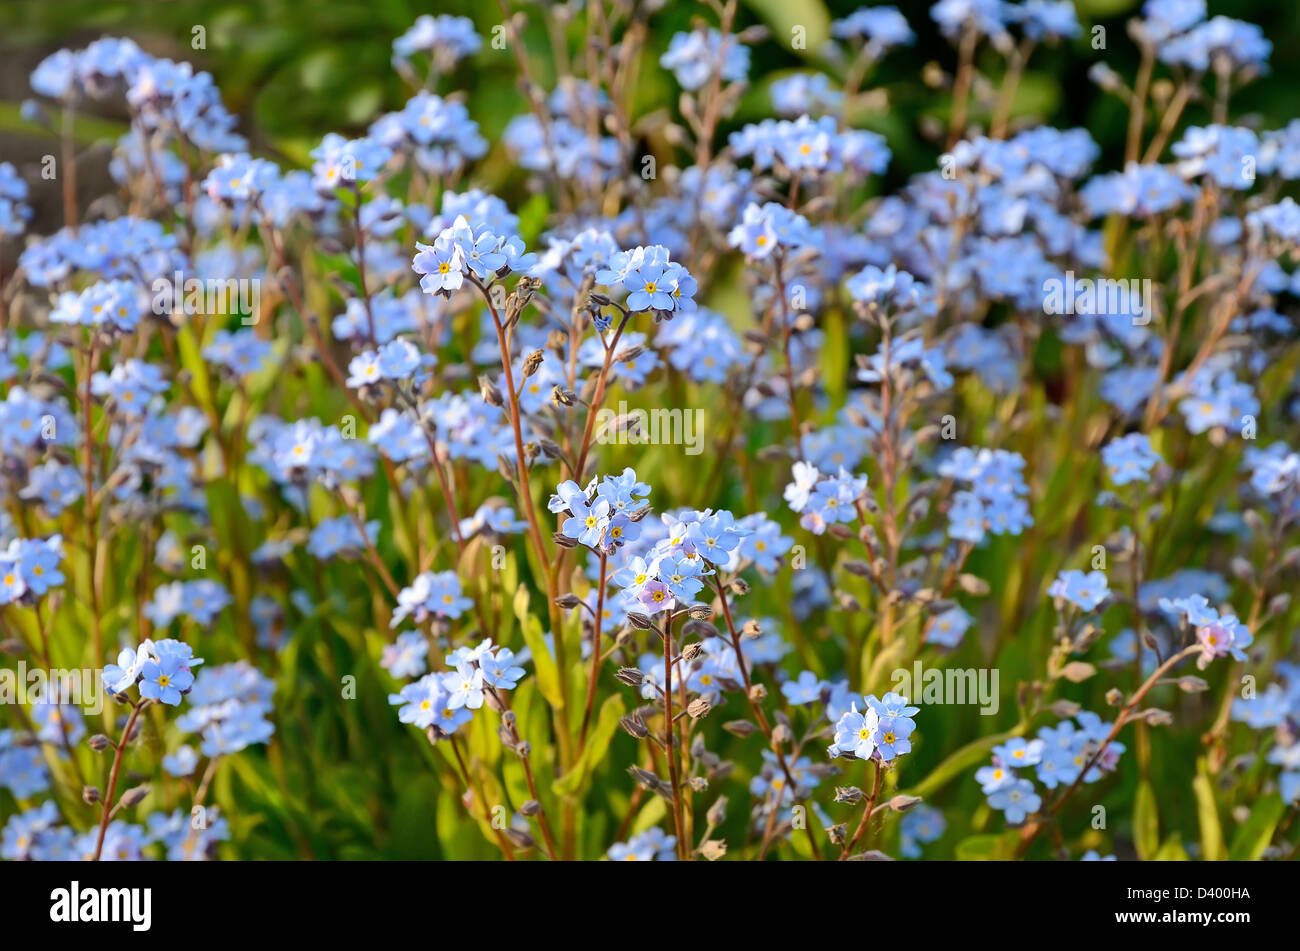 Forget-me-not flowers in the garden in the evening light Stock Photo